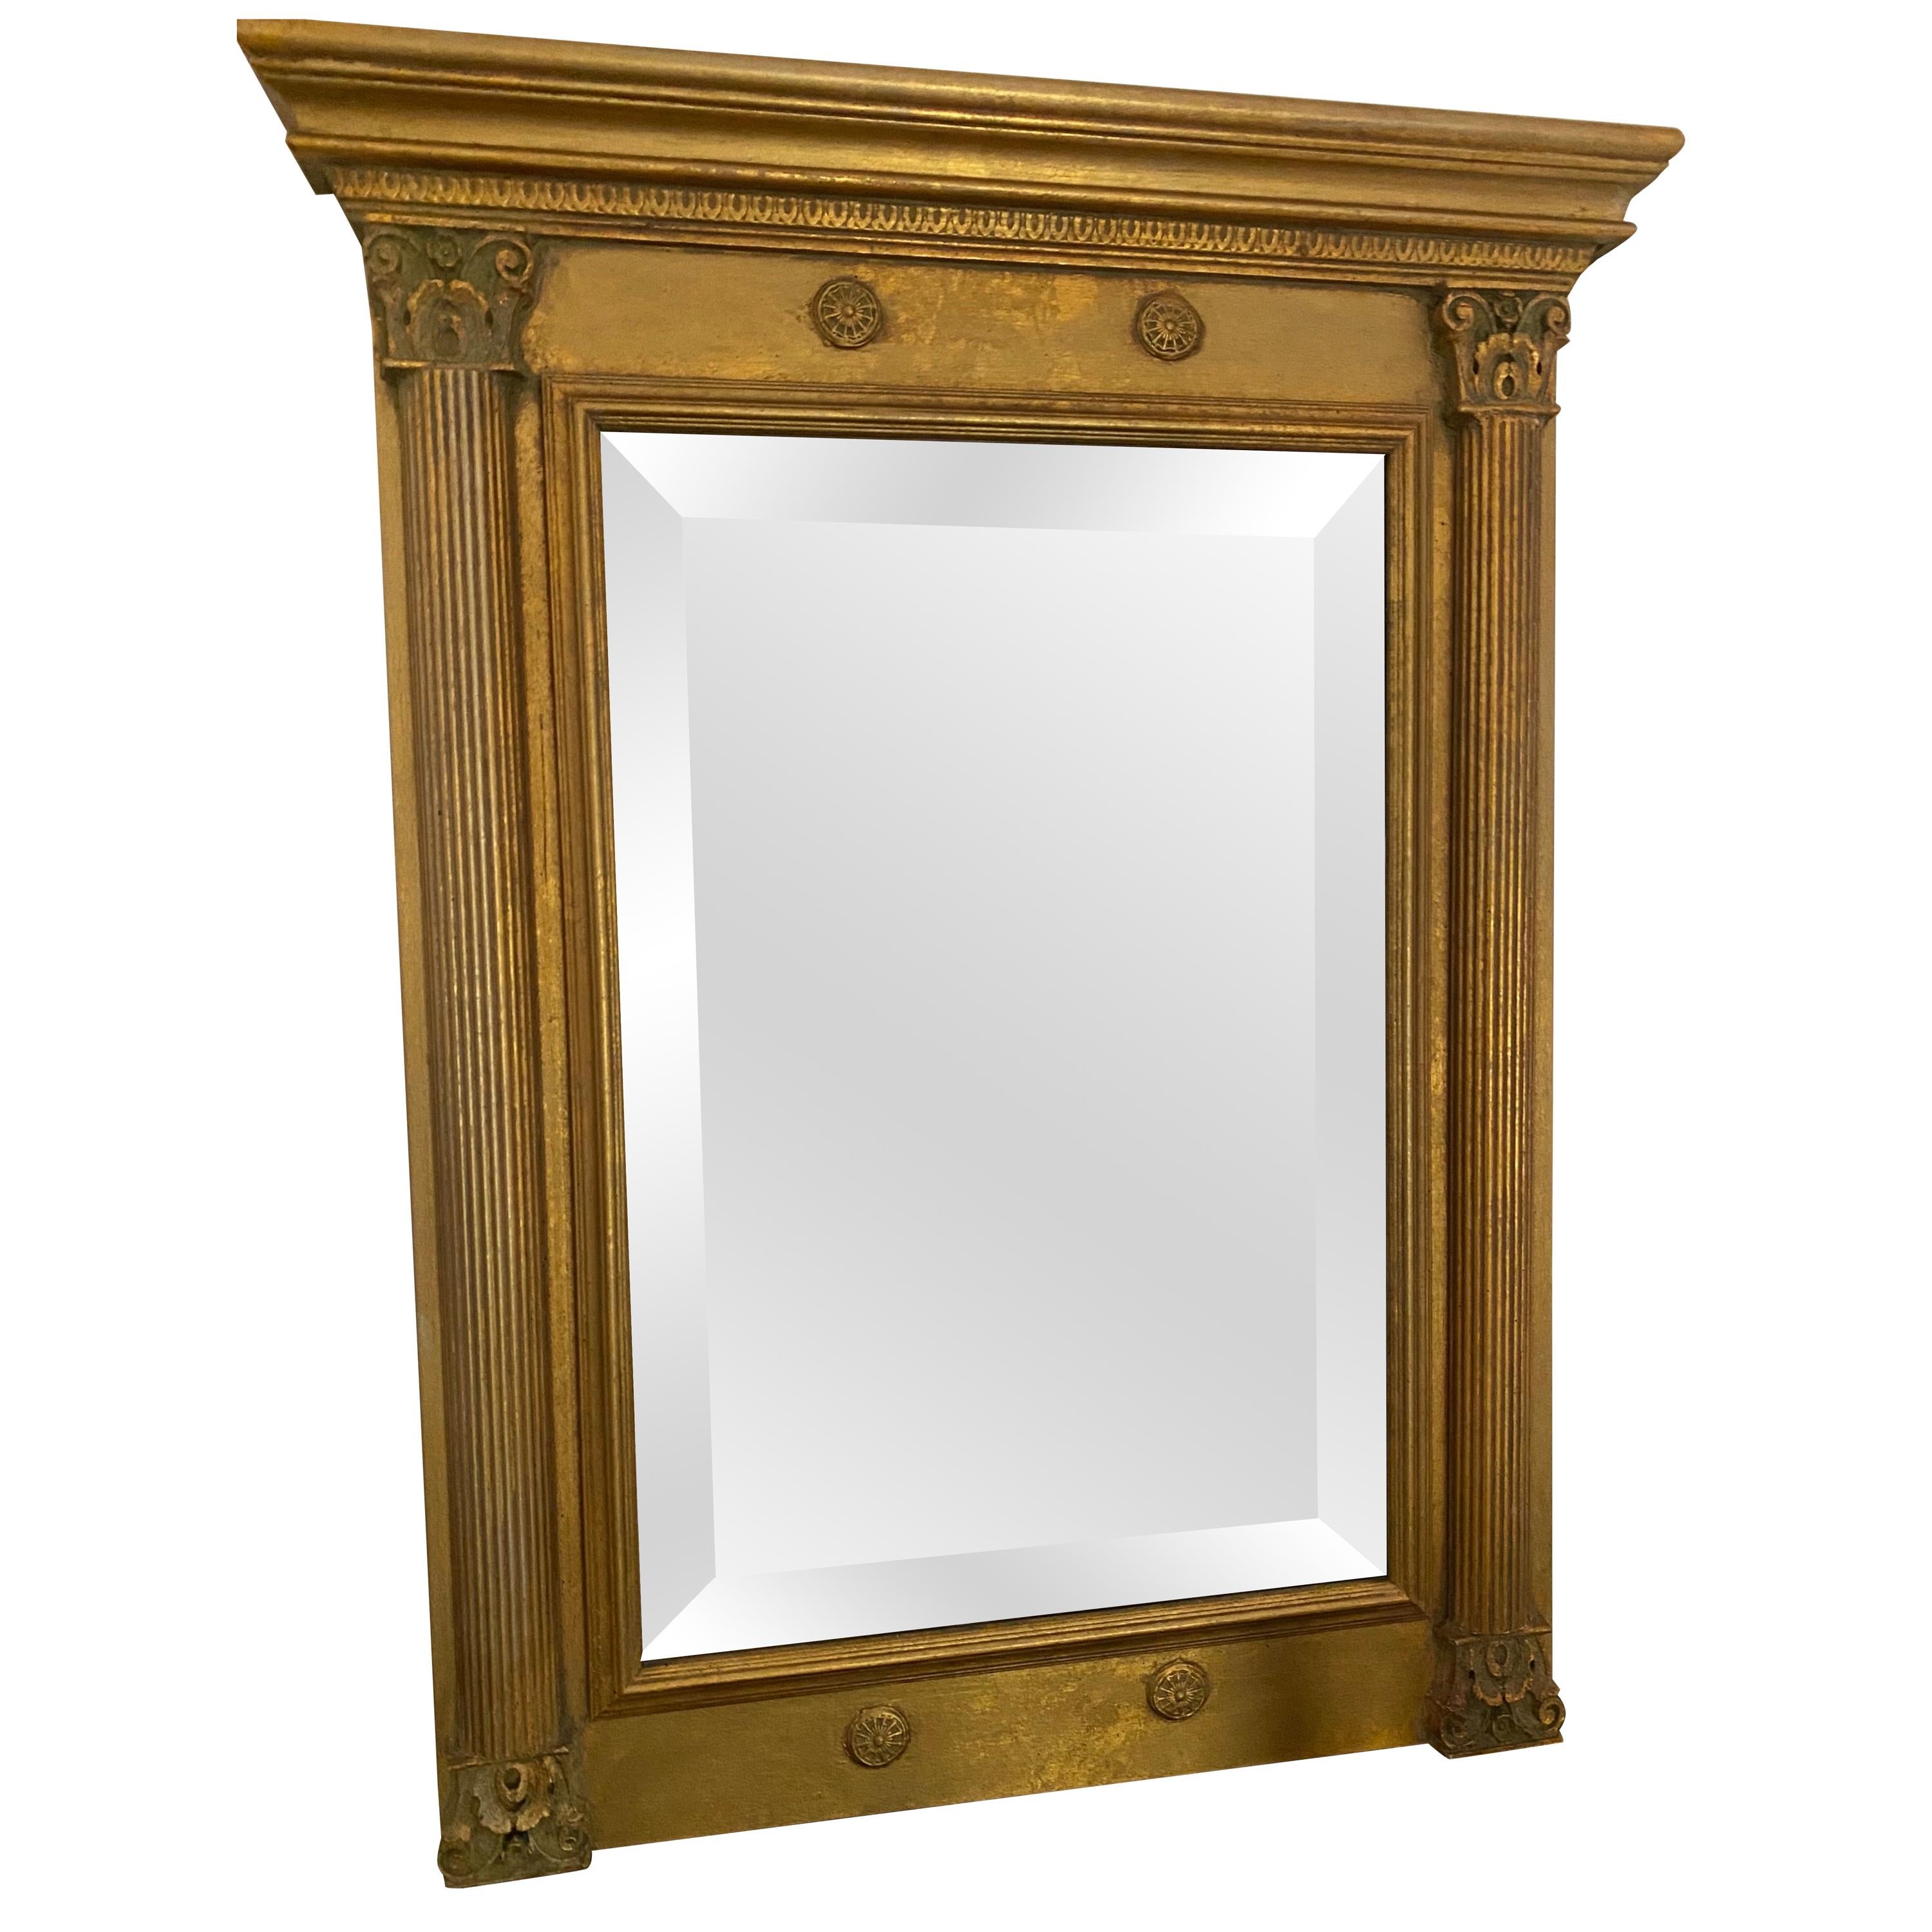 Neoclassical Revival Style Gold Gilt Frame Mirror